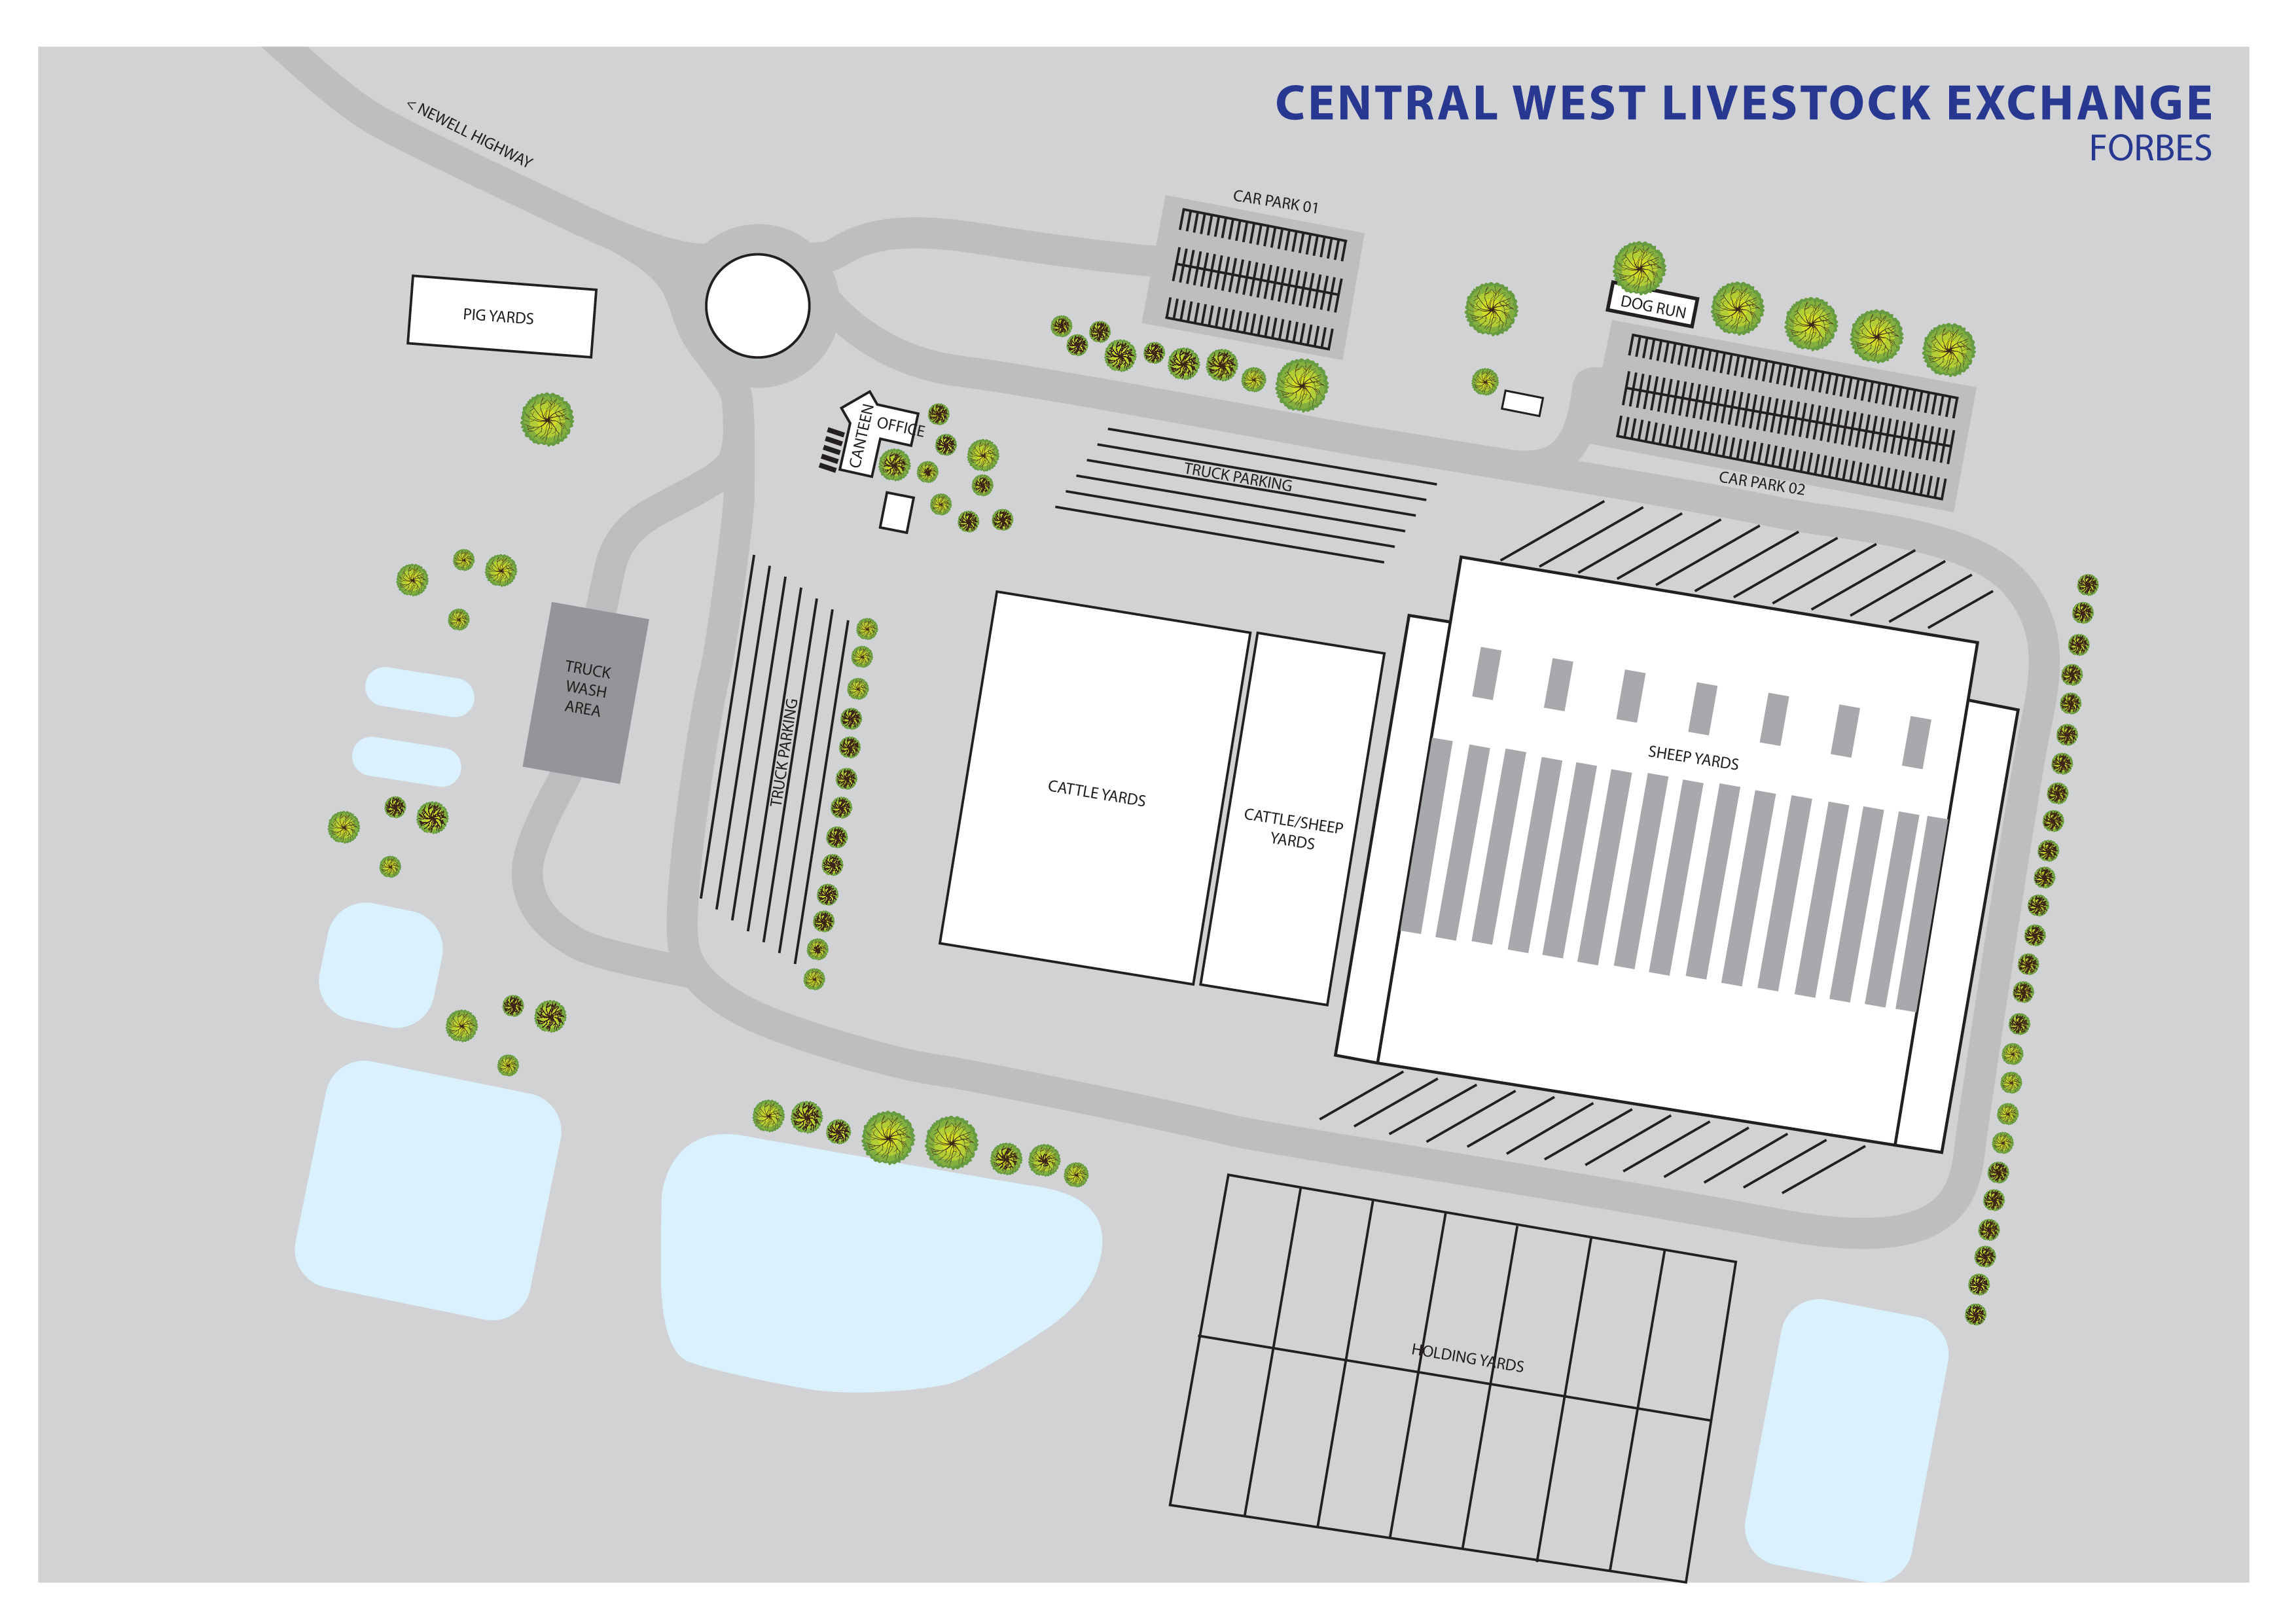 CWLE site map